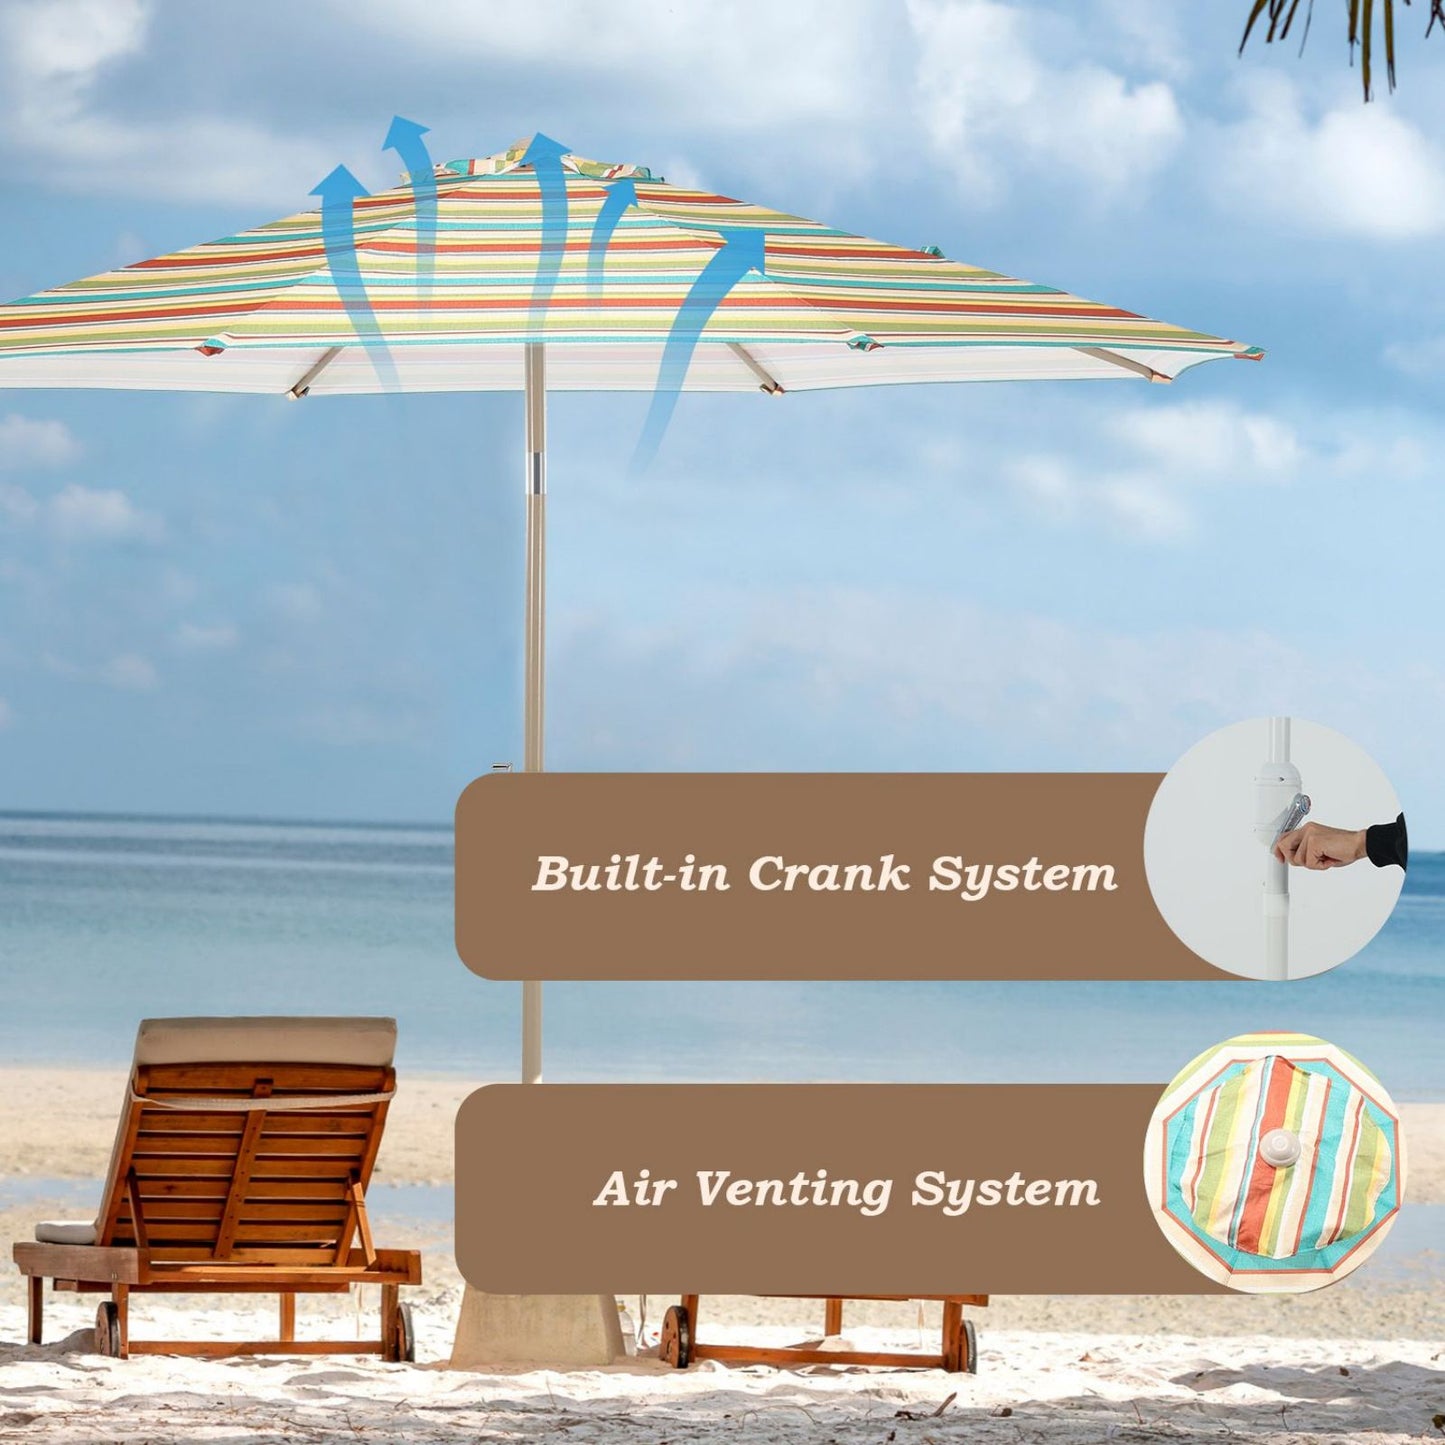 9FT Outdoor Patio Market Umbrella Aluminum Frame with Push Button Tilt Crank and 8 Steel Ribs, UV Protection  Aoodor    